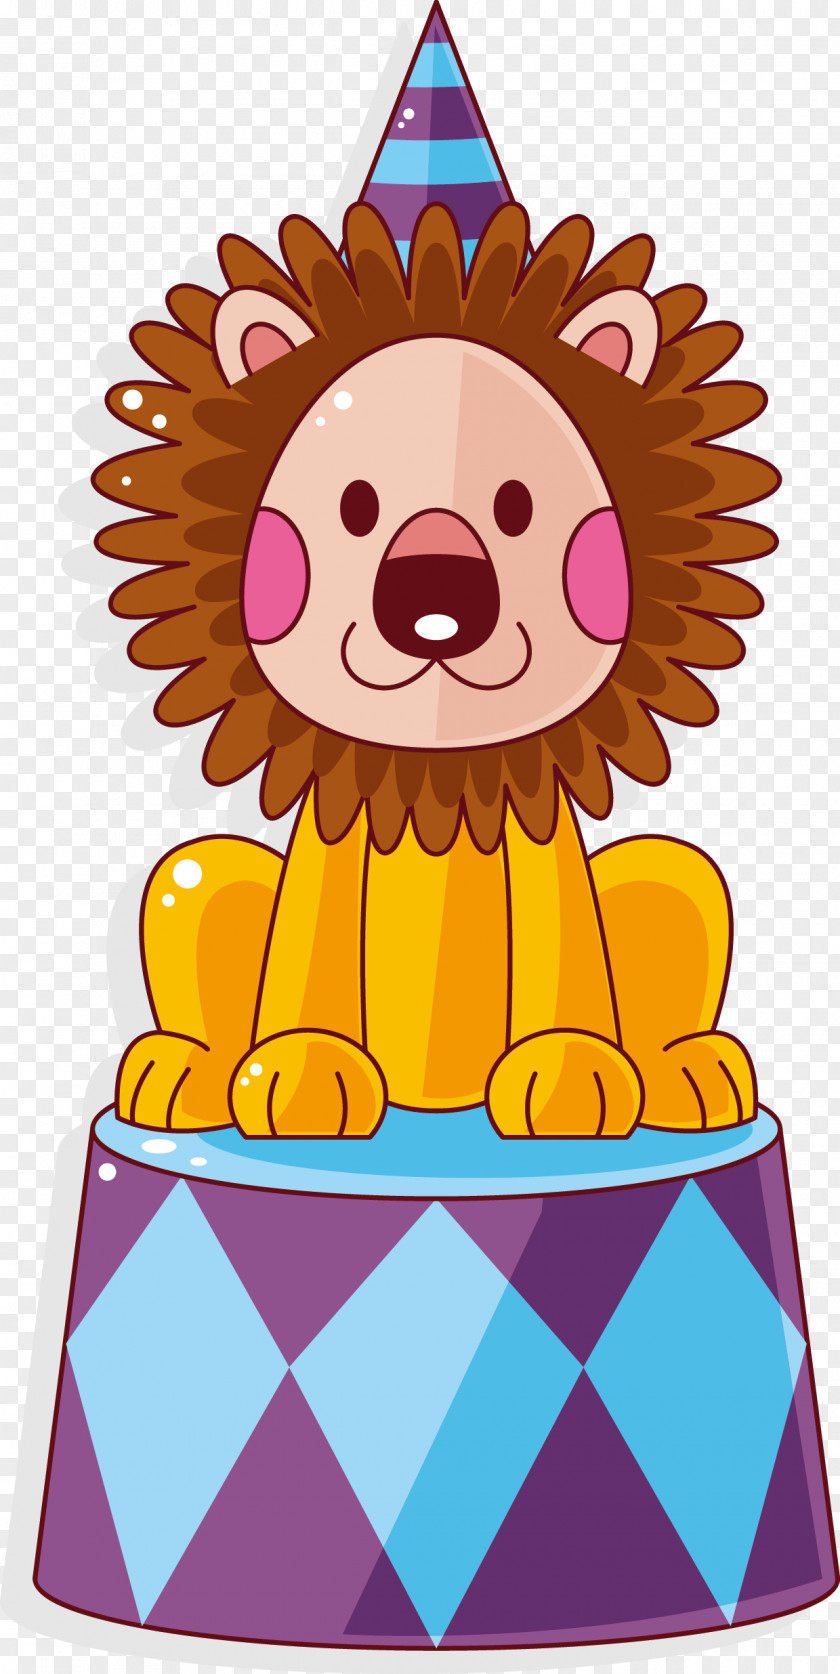 Circus Lion Vector Hair Tie Comb Ring Afro-textured PNG